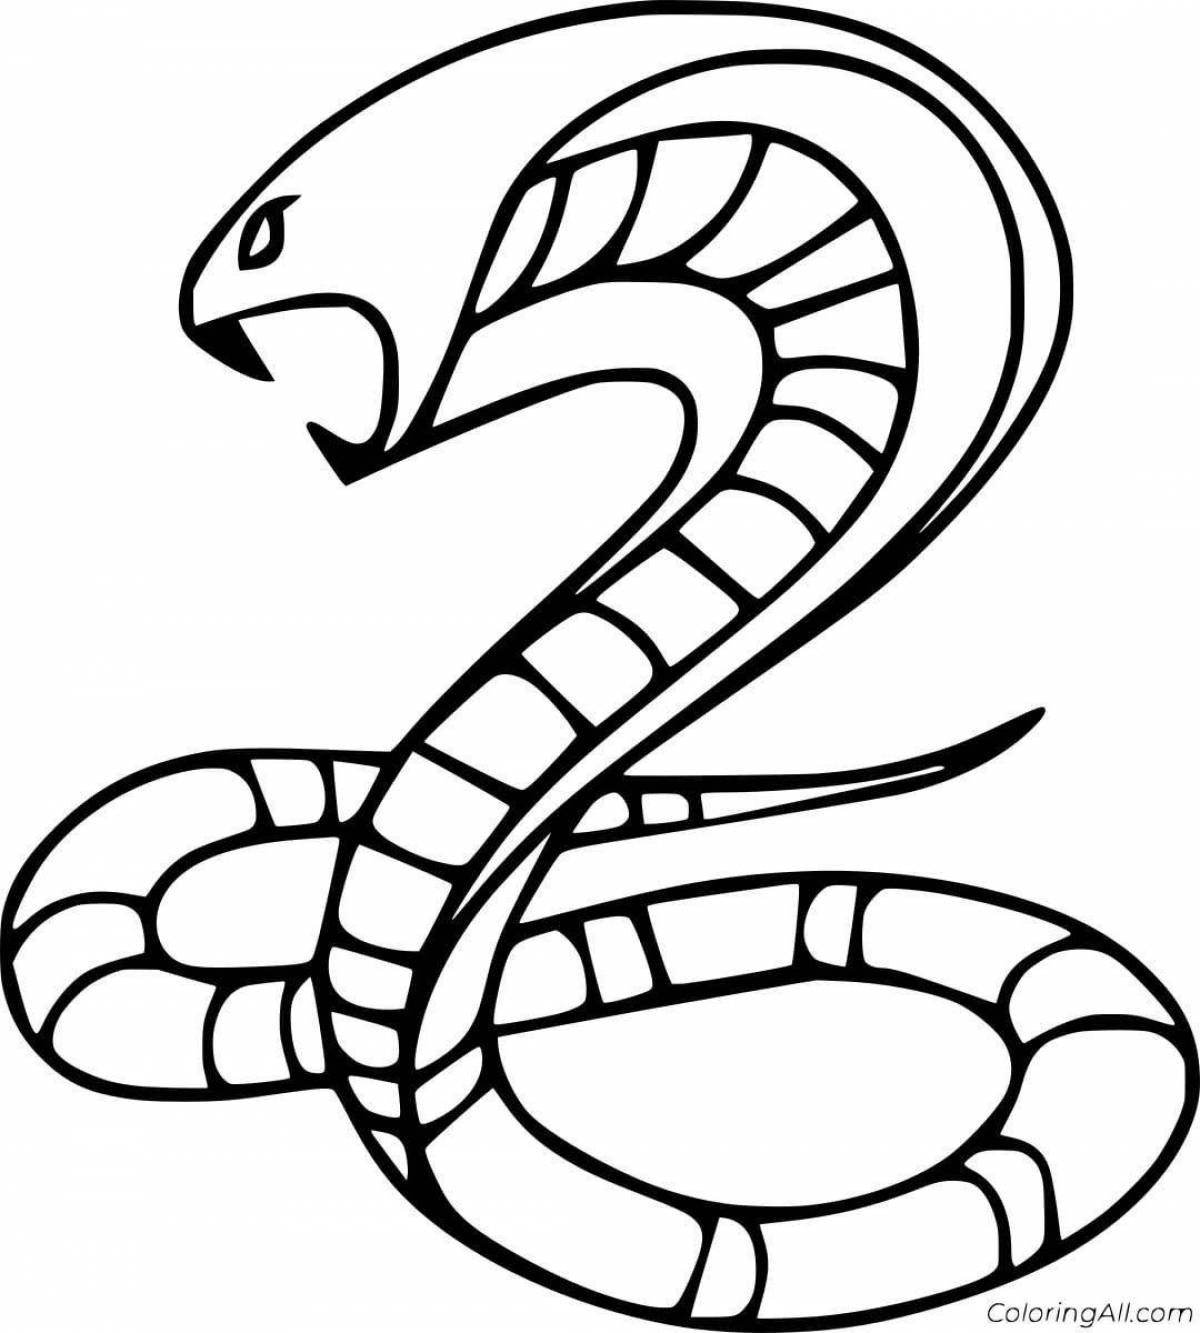 Sparkly snake coloring page